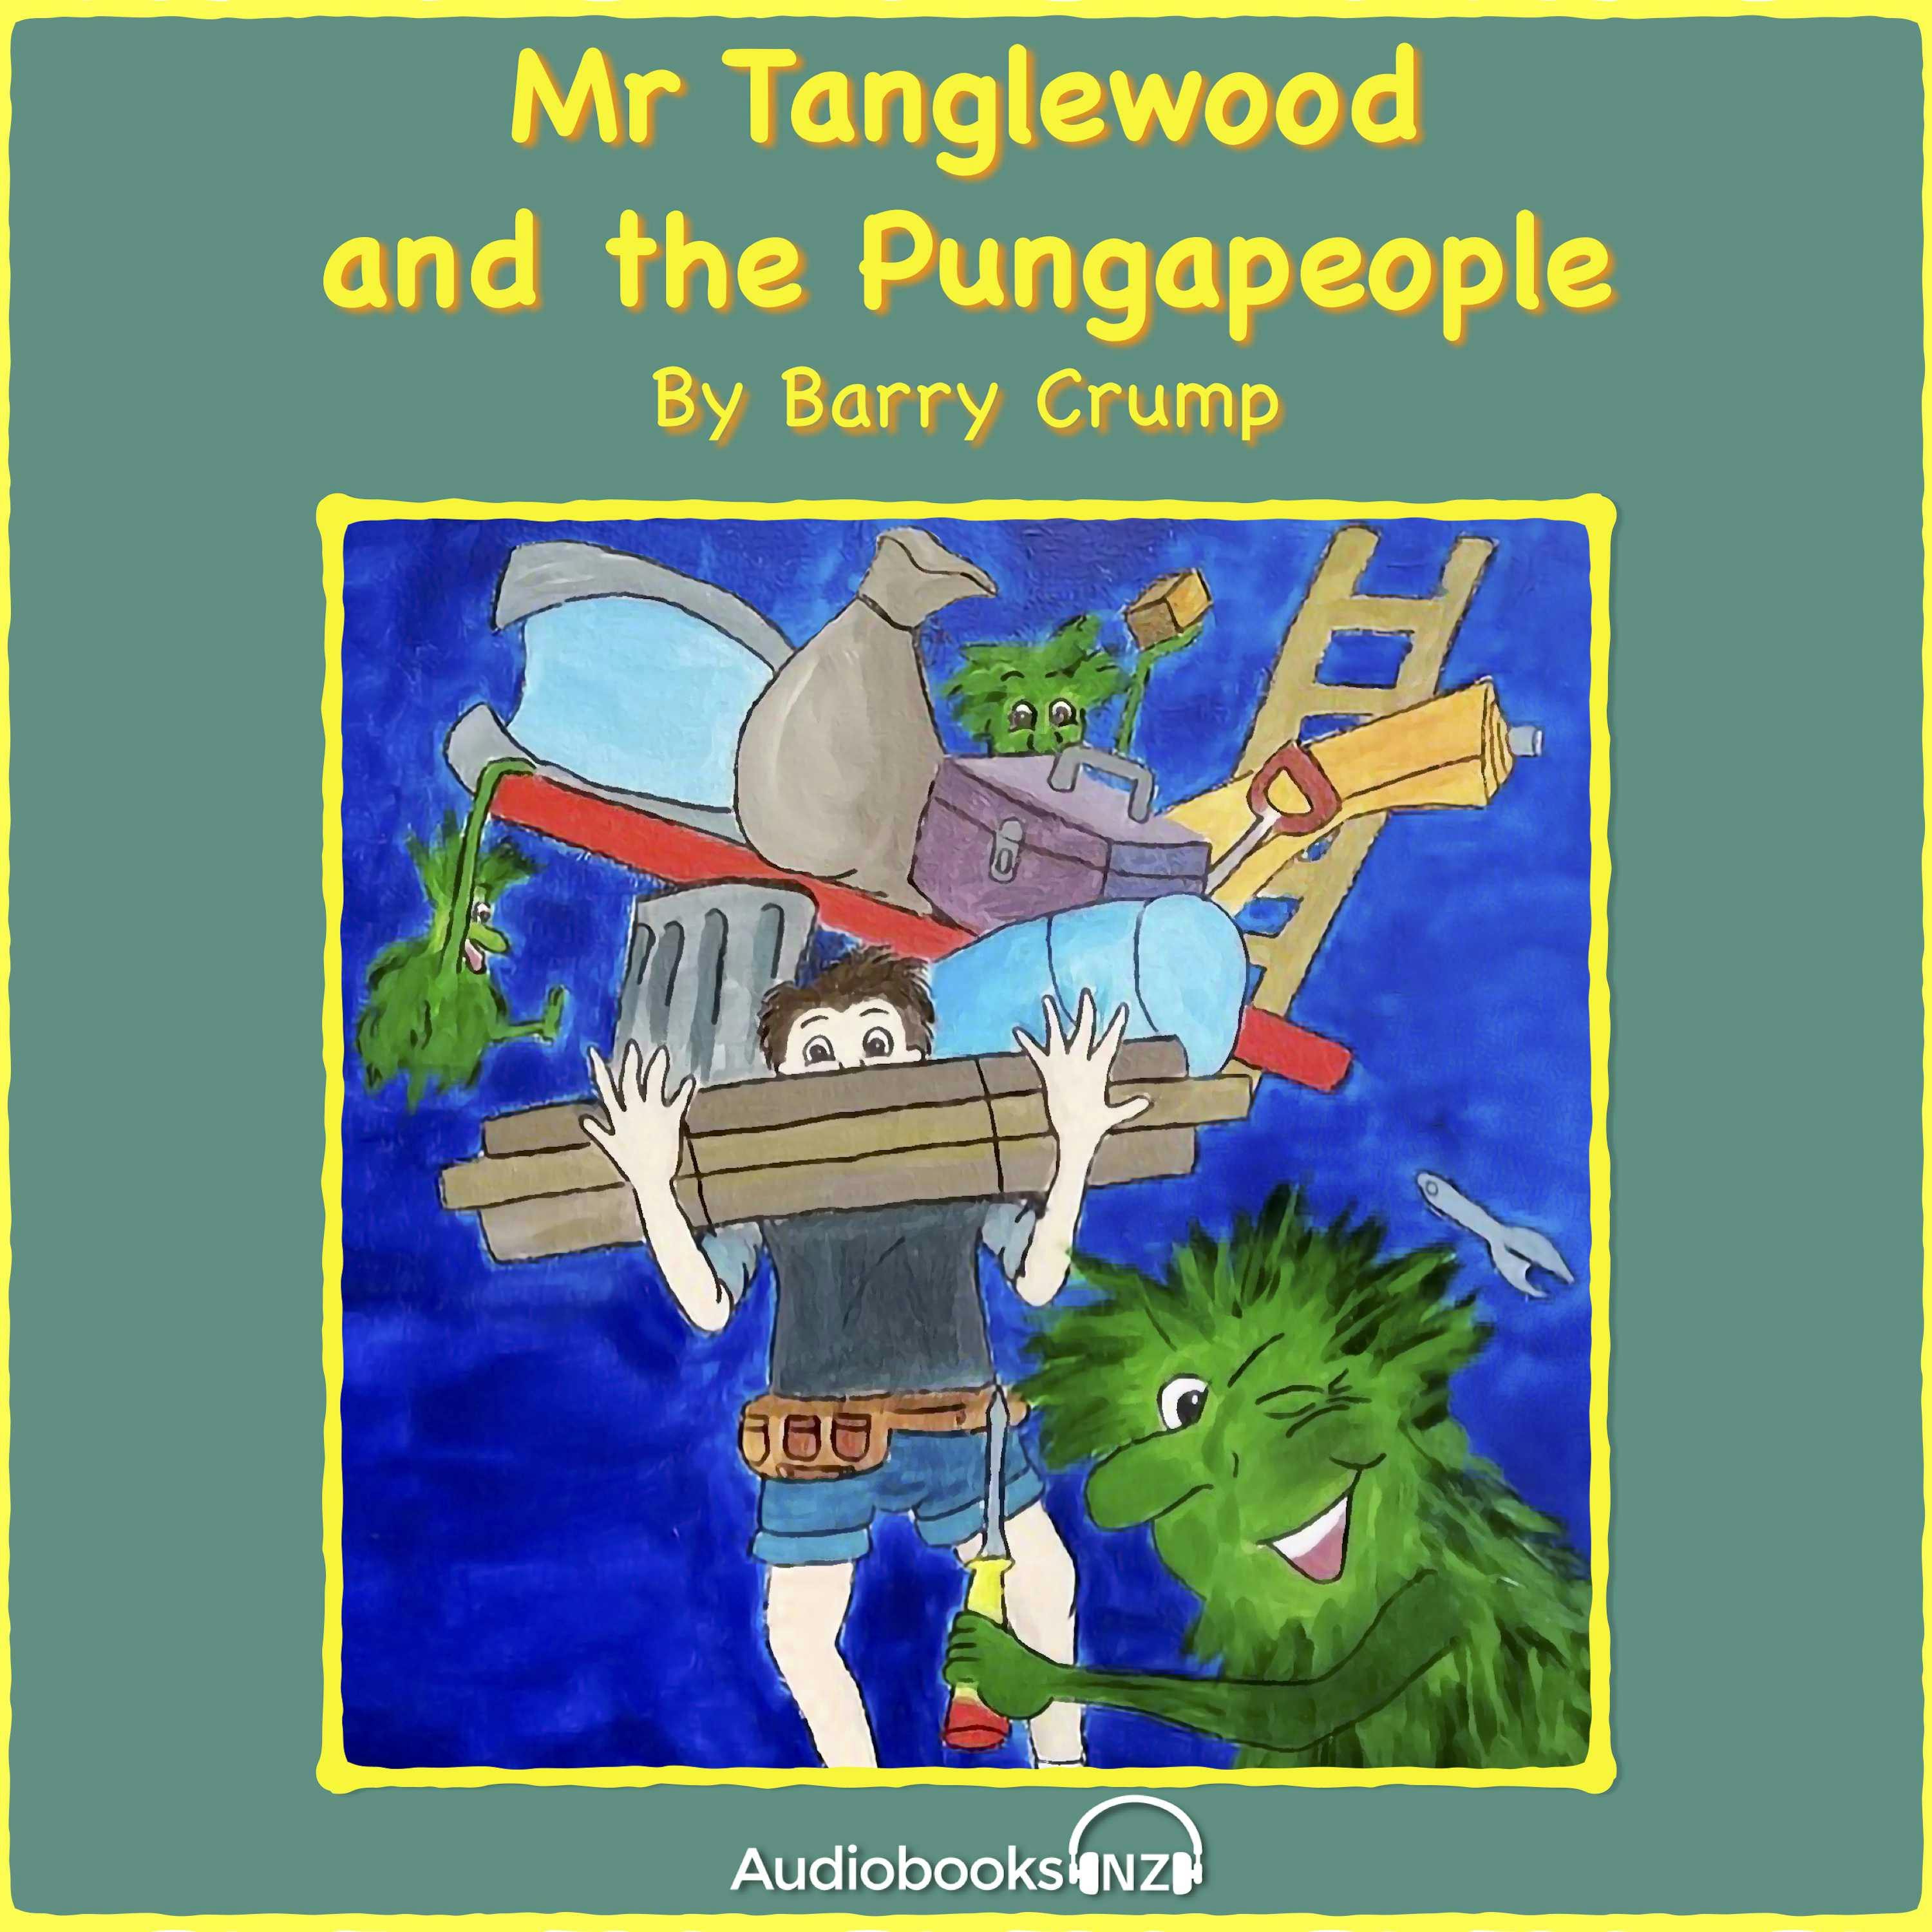 Mr Tanglewood and the Pungapeople: A Barry Crump Classic - Barry Crump